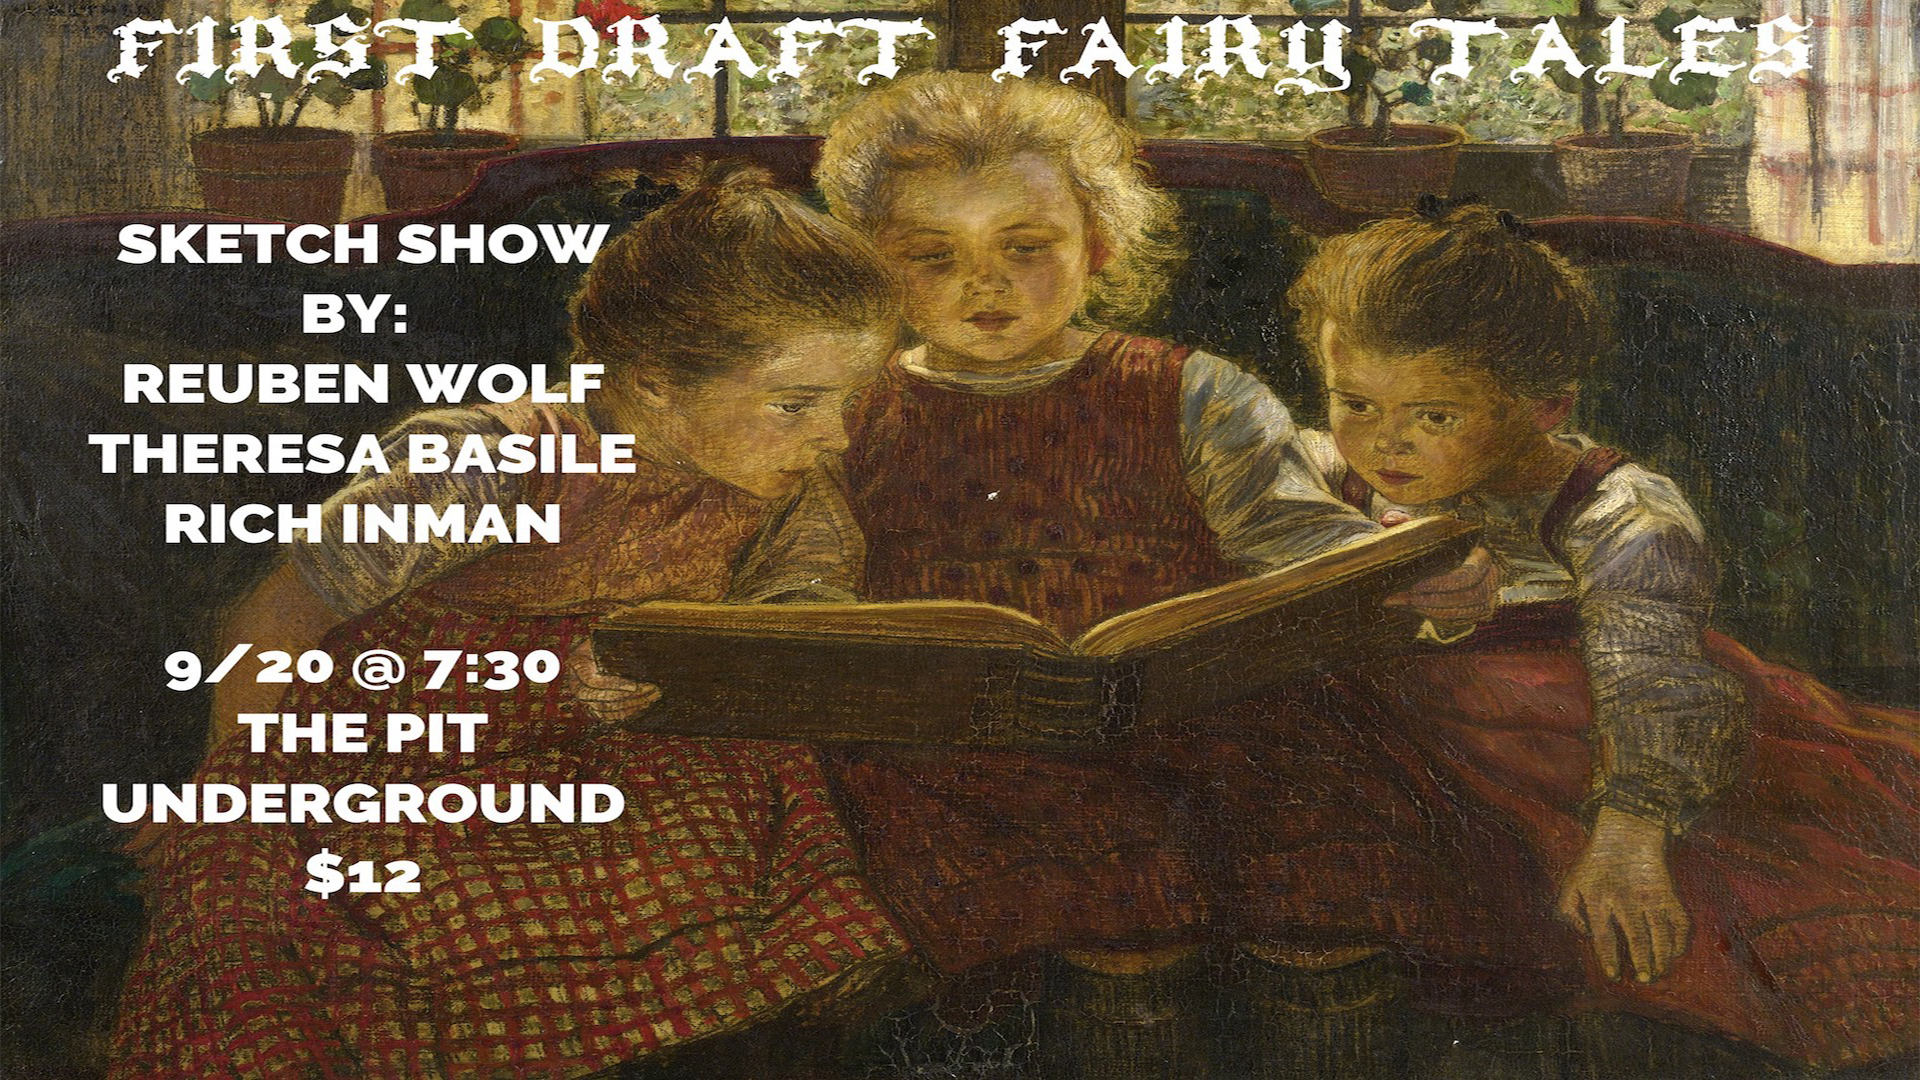 First Draft Fairy Tales